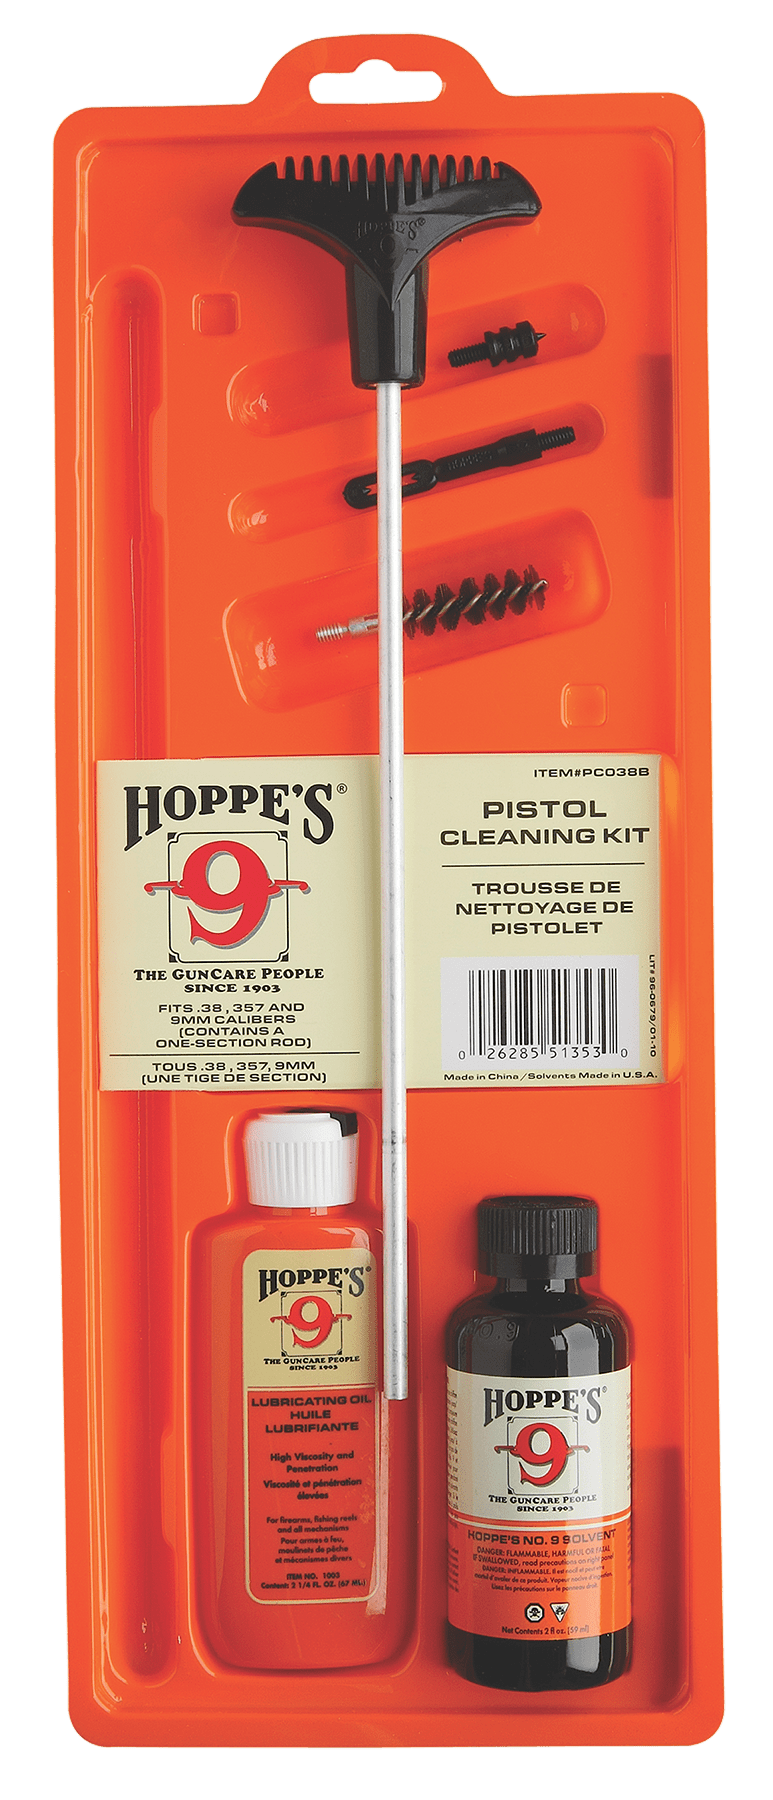 Hoppe's Hoppes 44/45cal Pstl Clng Kit Clam Cleaning Equipment